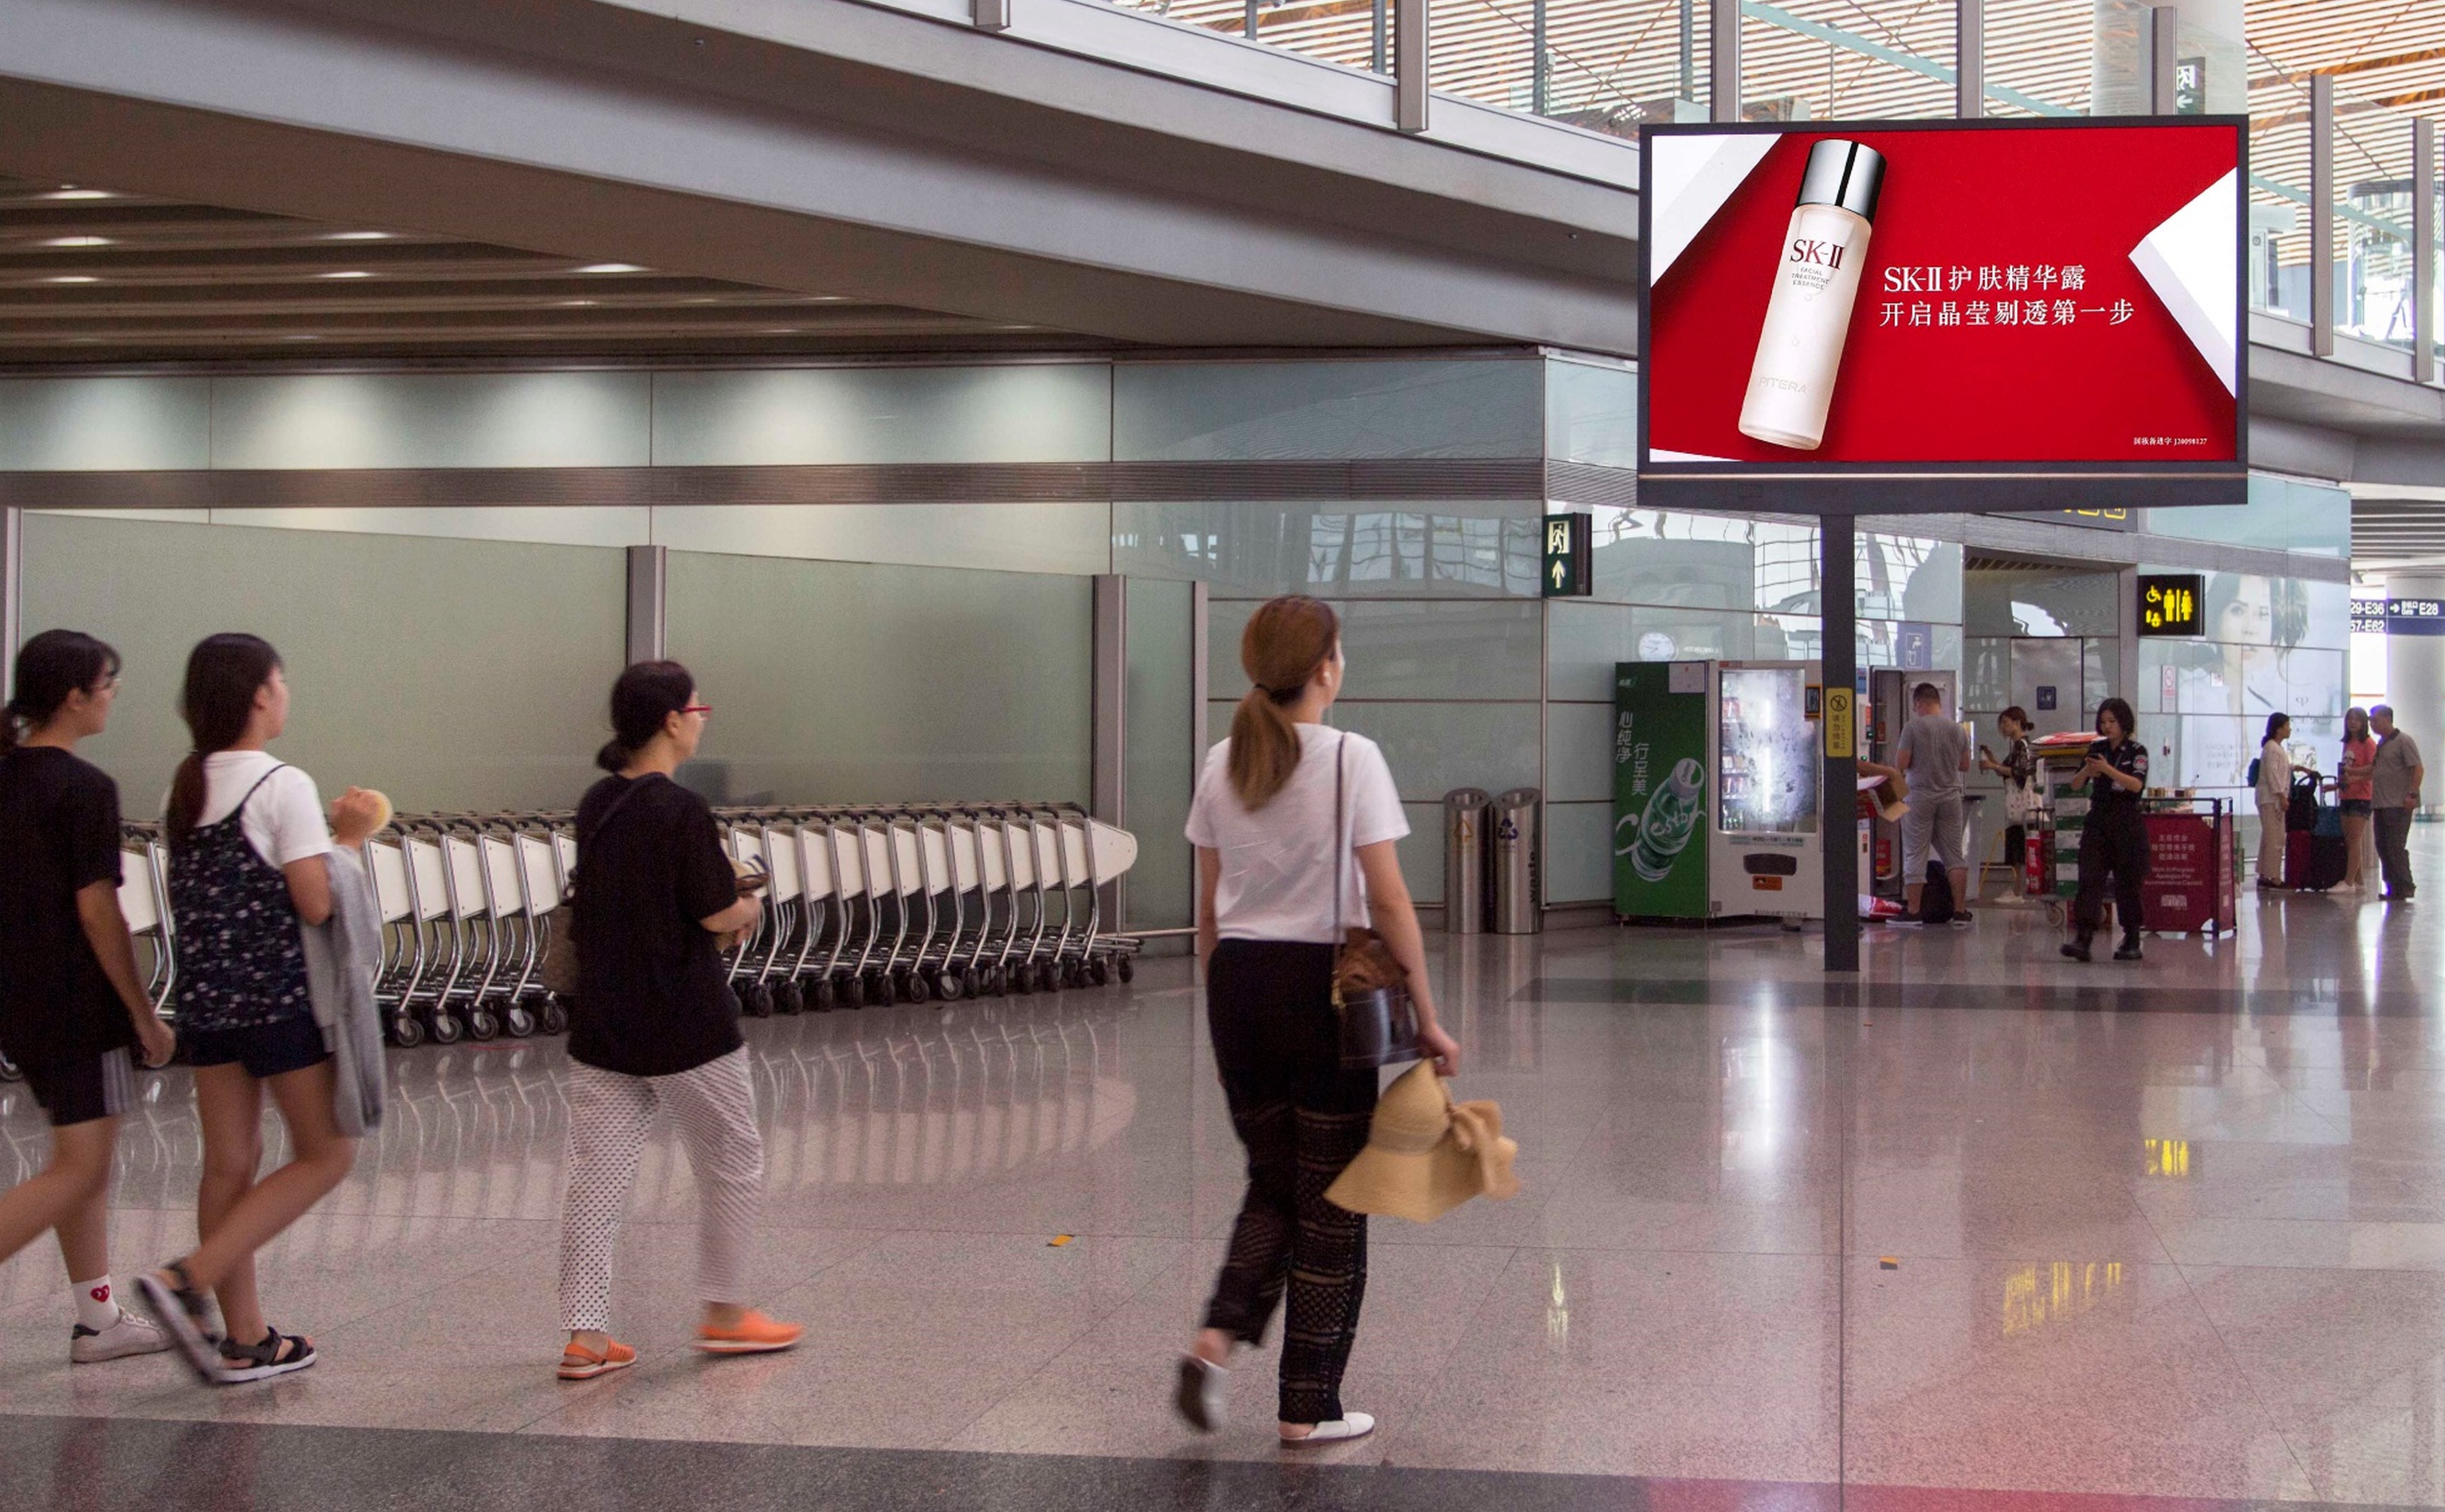 Capital Airport Duty Free Large Screen Advertising